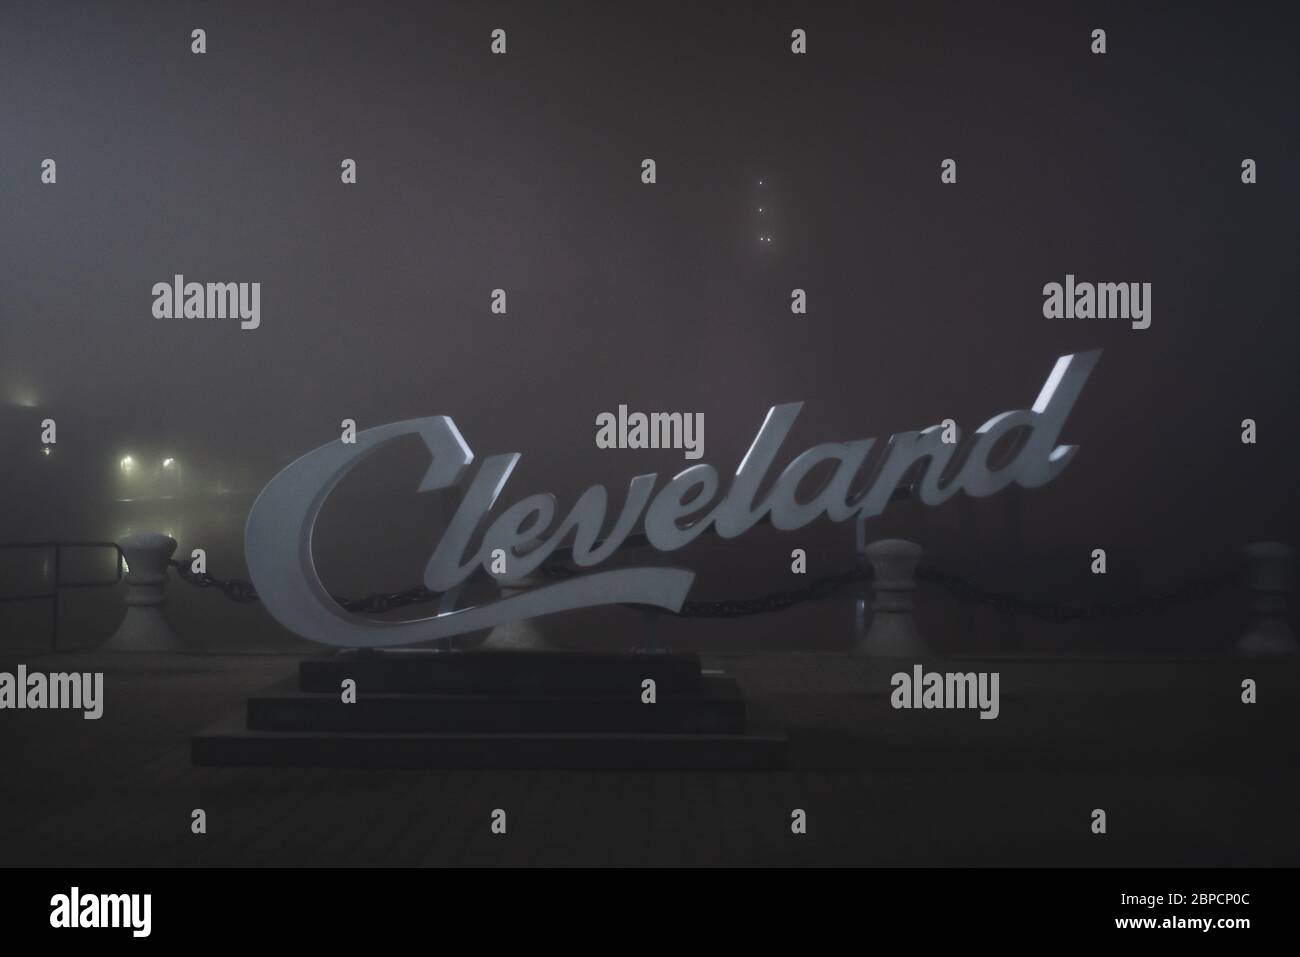 Cleveland Script High Resolution Stock Photography And Images Alamy